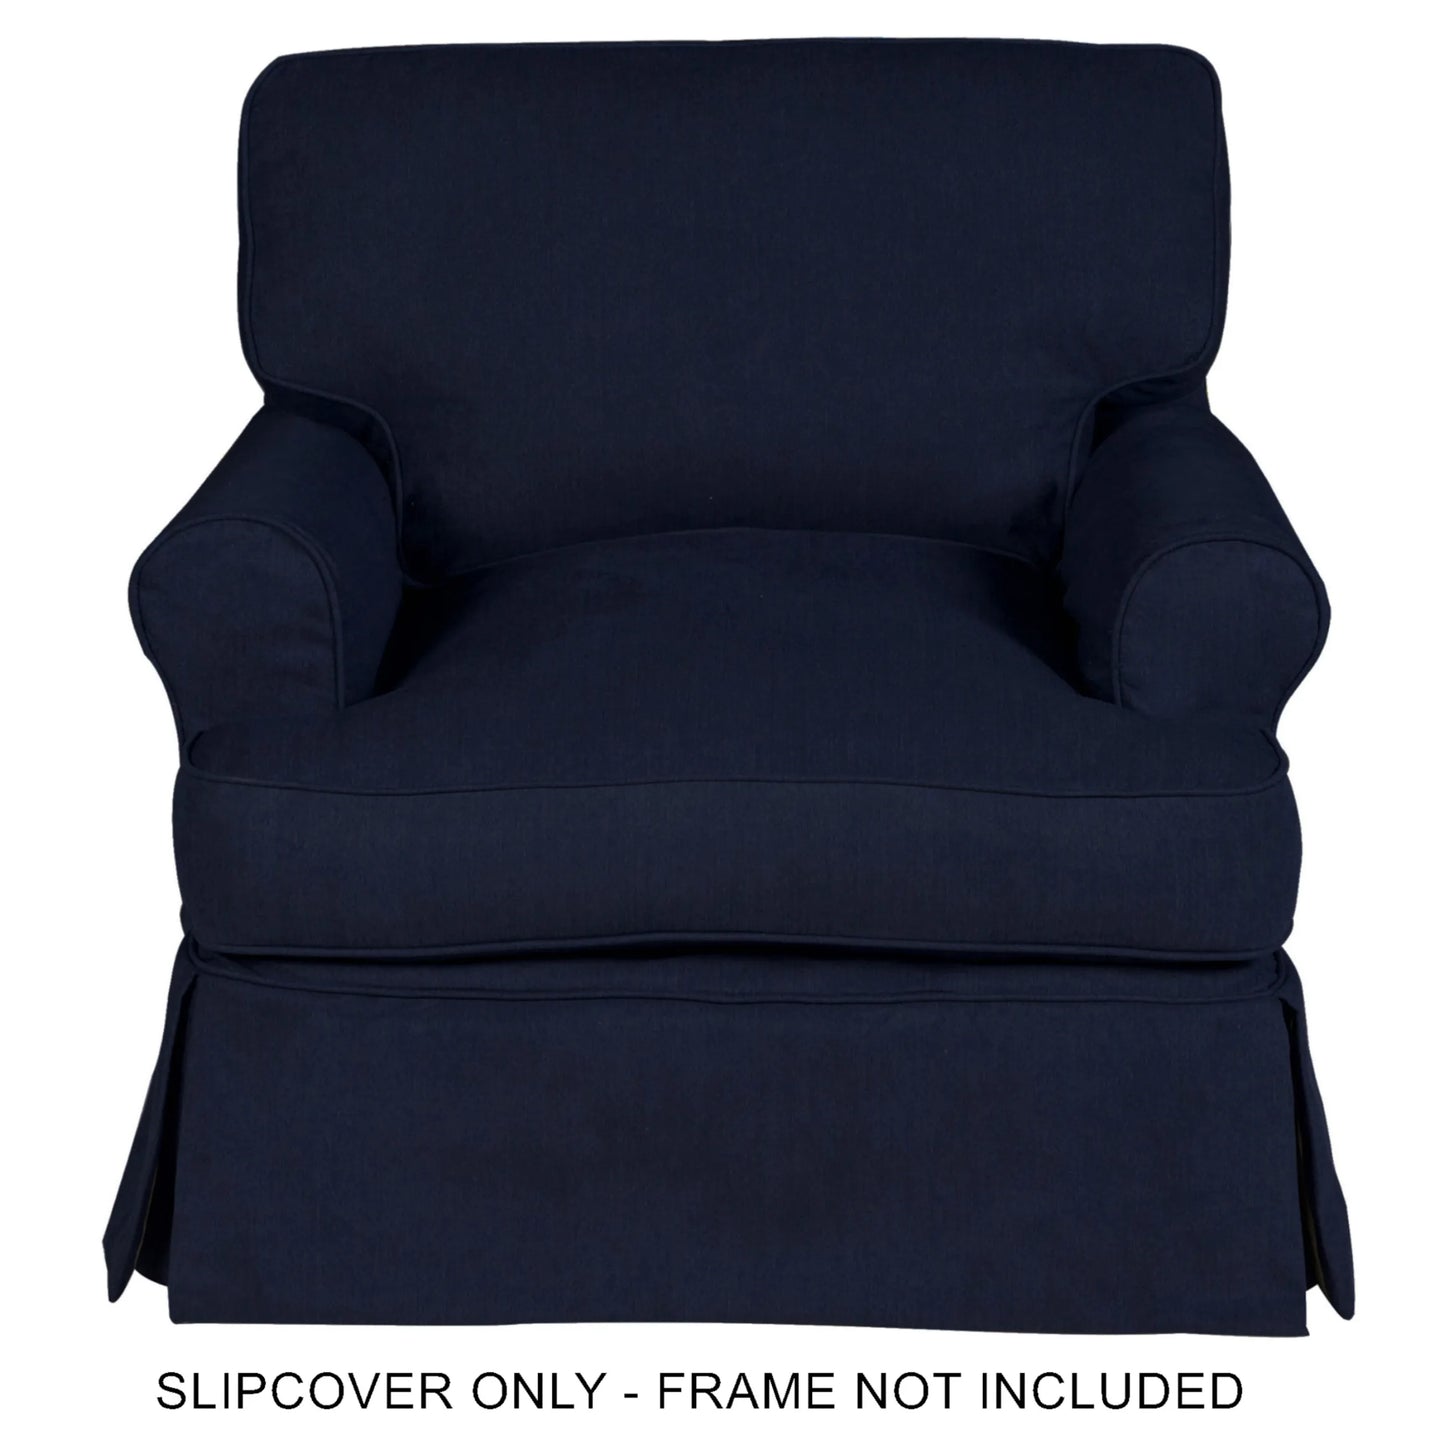 Sunset Trading Horizon Slipcover for T-Cushion Chair | Stain Resistant Performance Fabric | Navy Blue